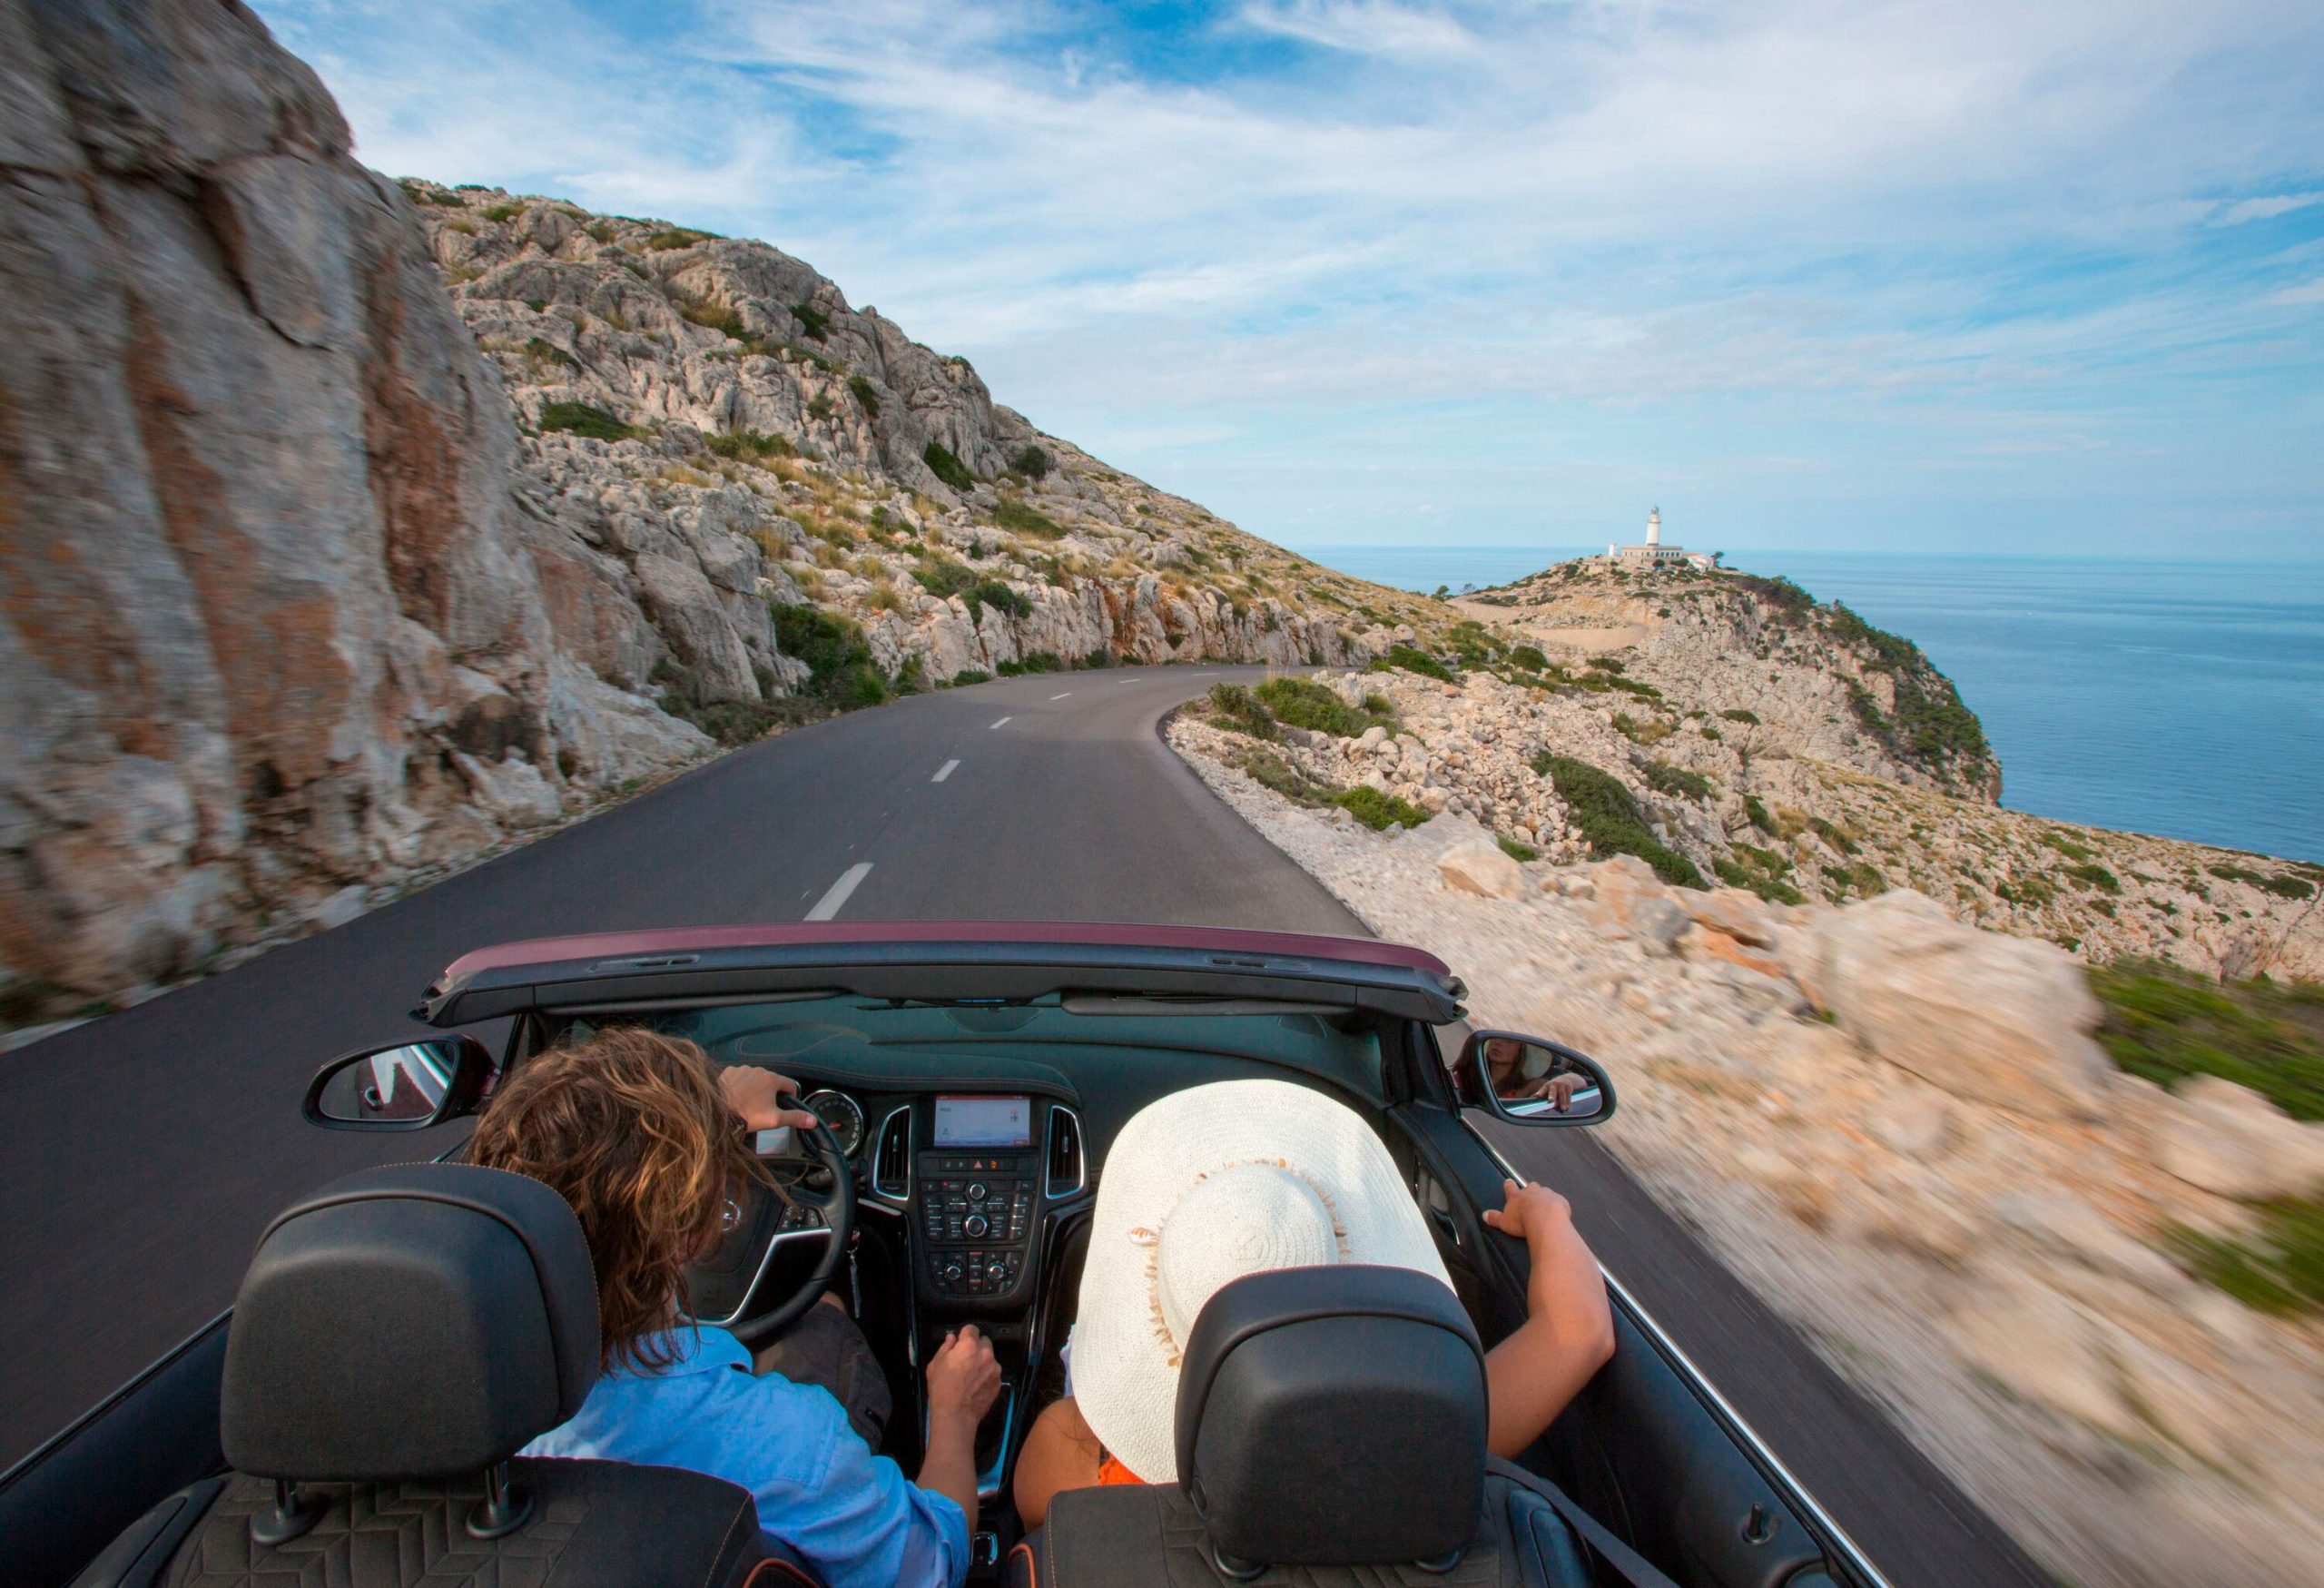 Two people in a convertible on a rocky mountain road overlooking a white lighthouse on the edge of a cliff by the sea.